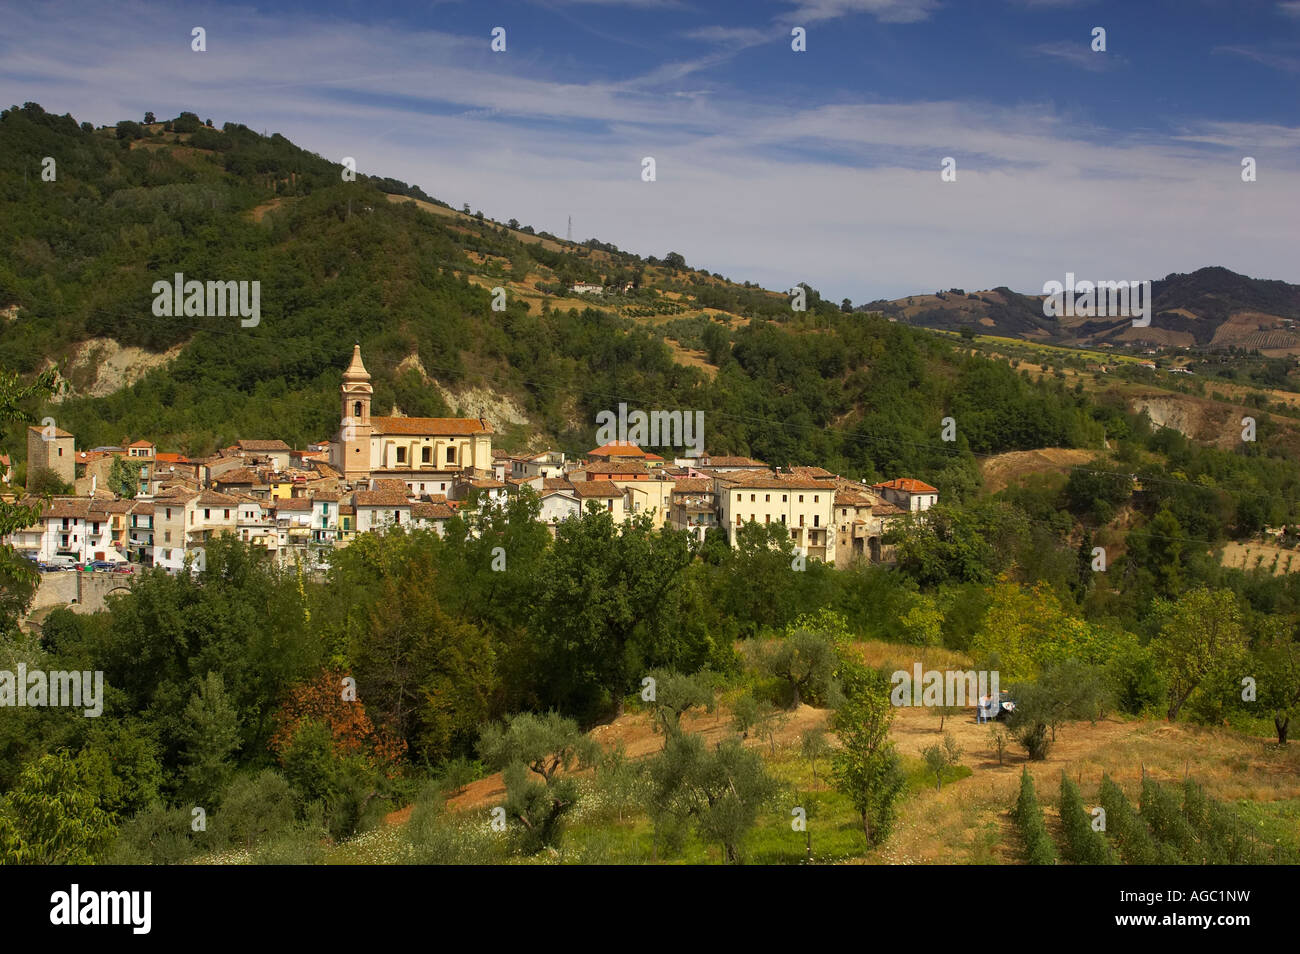 The town of Bisenti in the Abruzzo region of Italy. Stock Photo